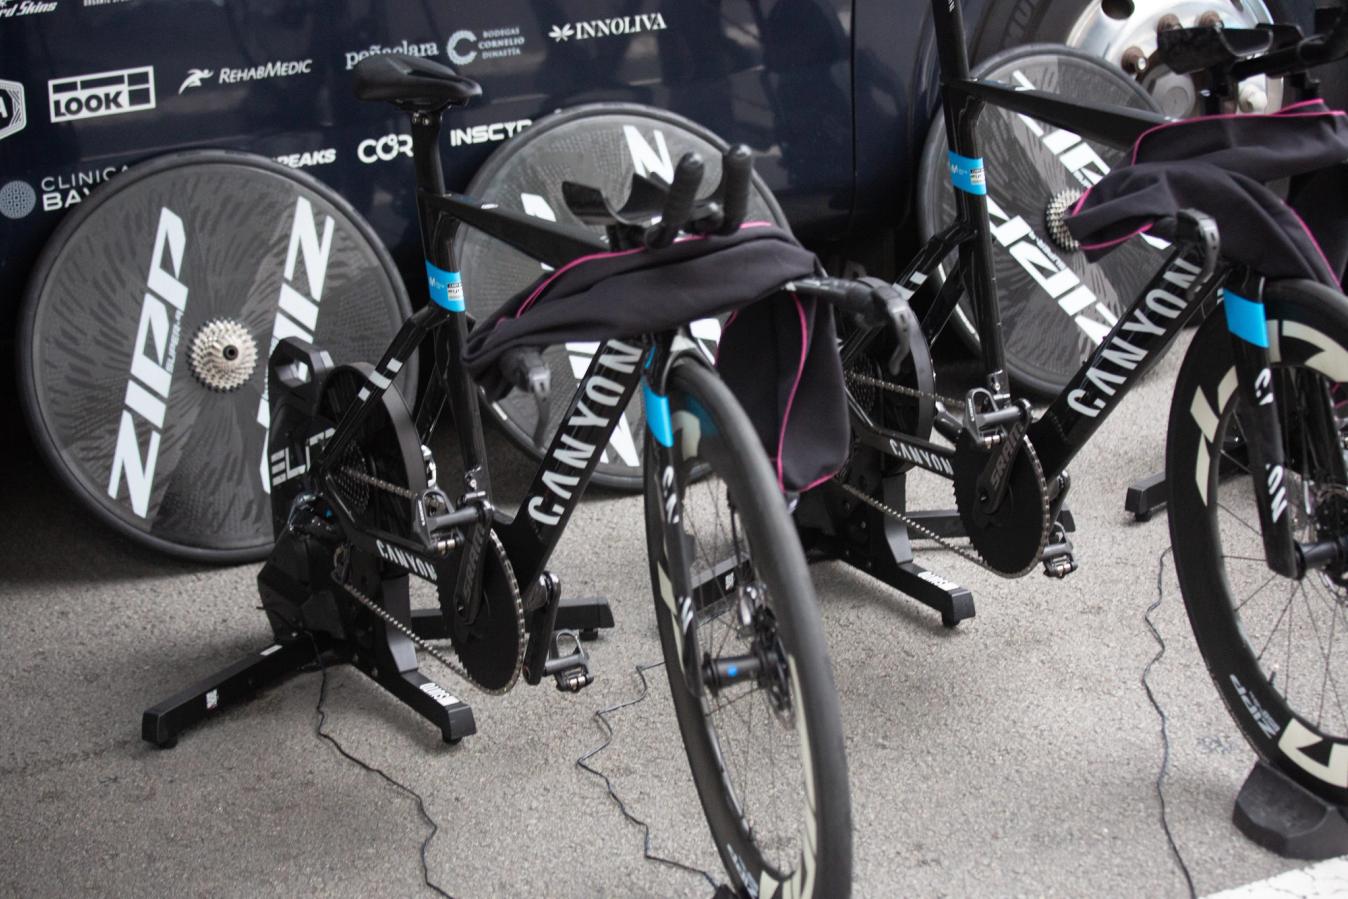 The Elite Suito is the most popular turbo trainer at the Vuelta a España